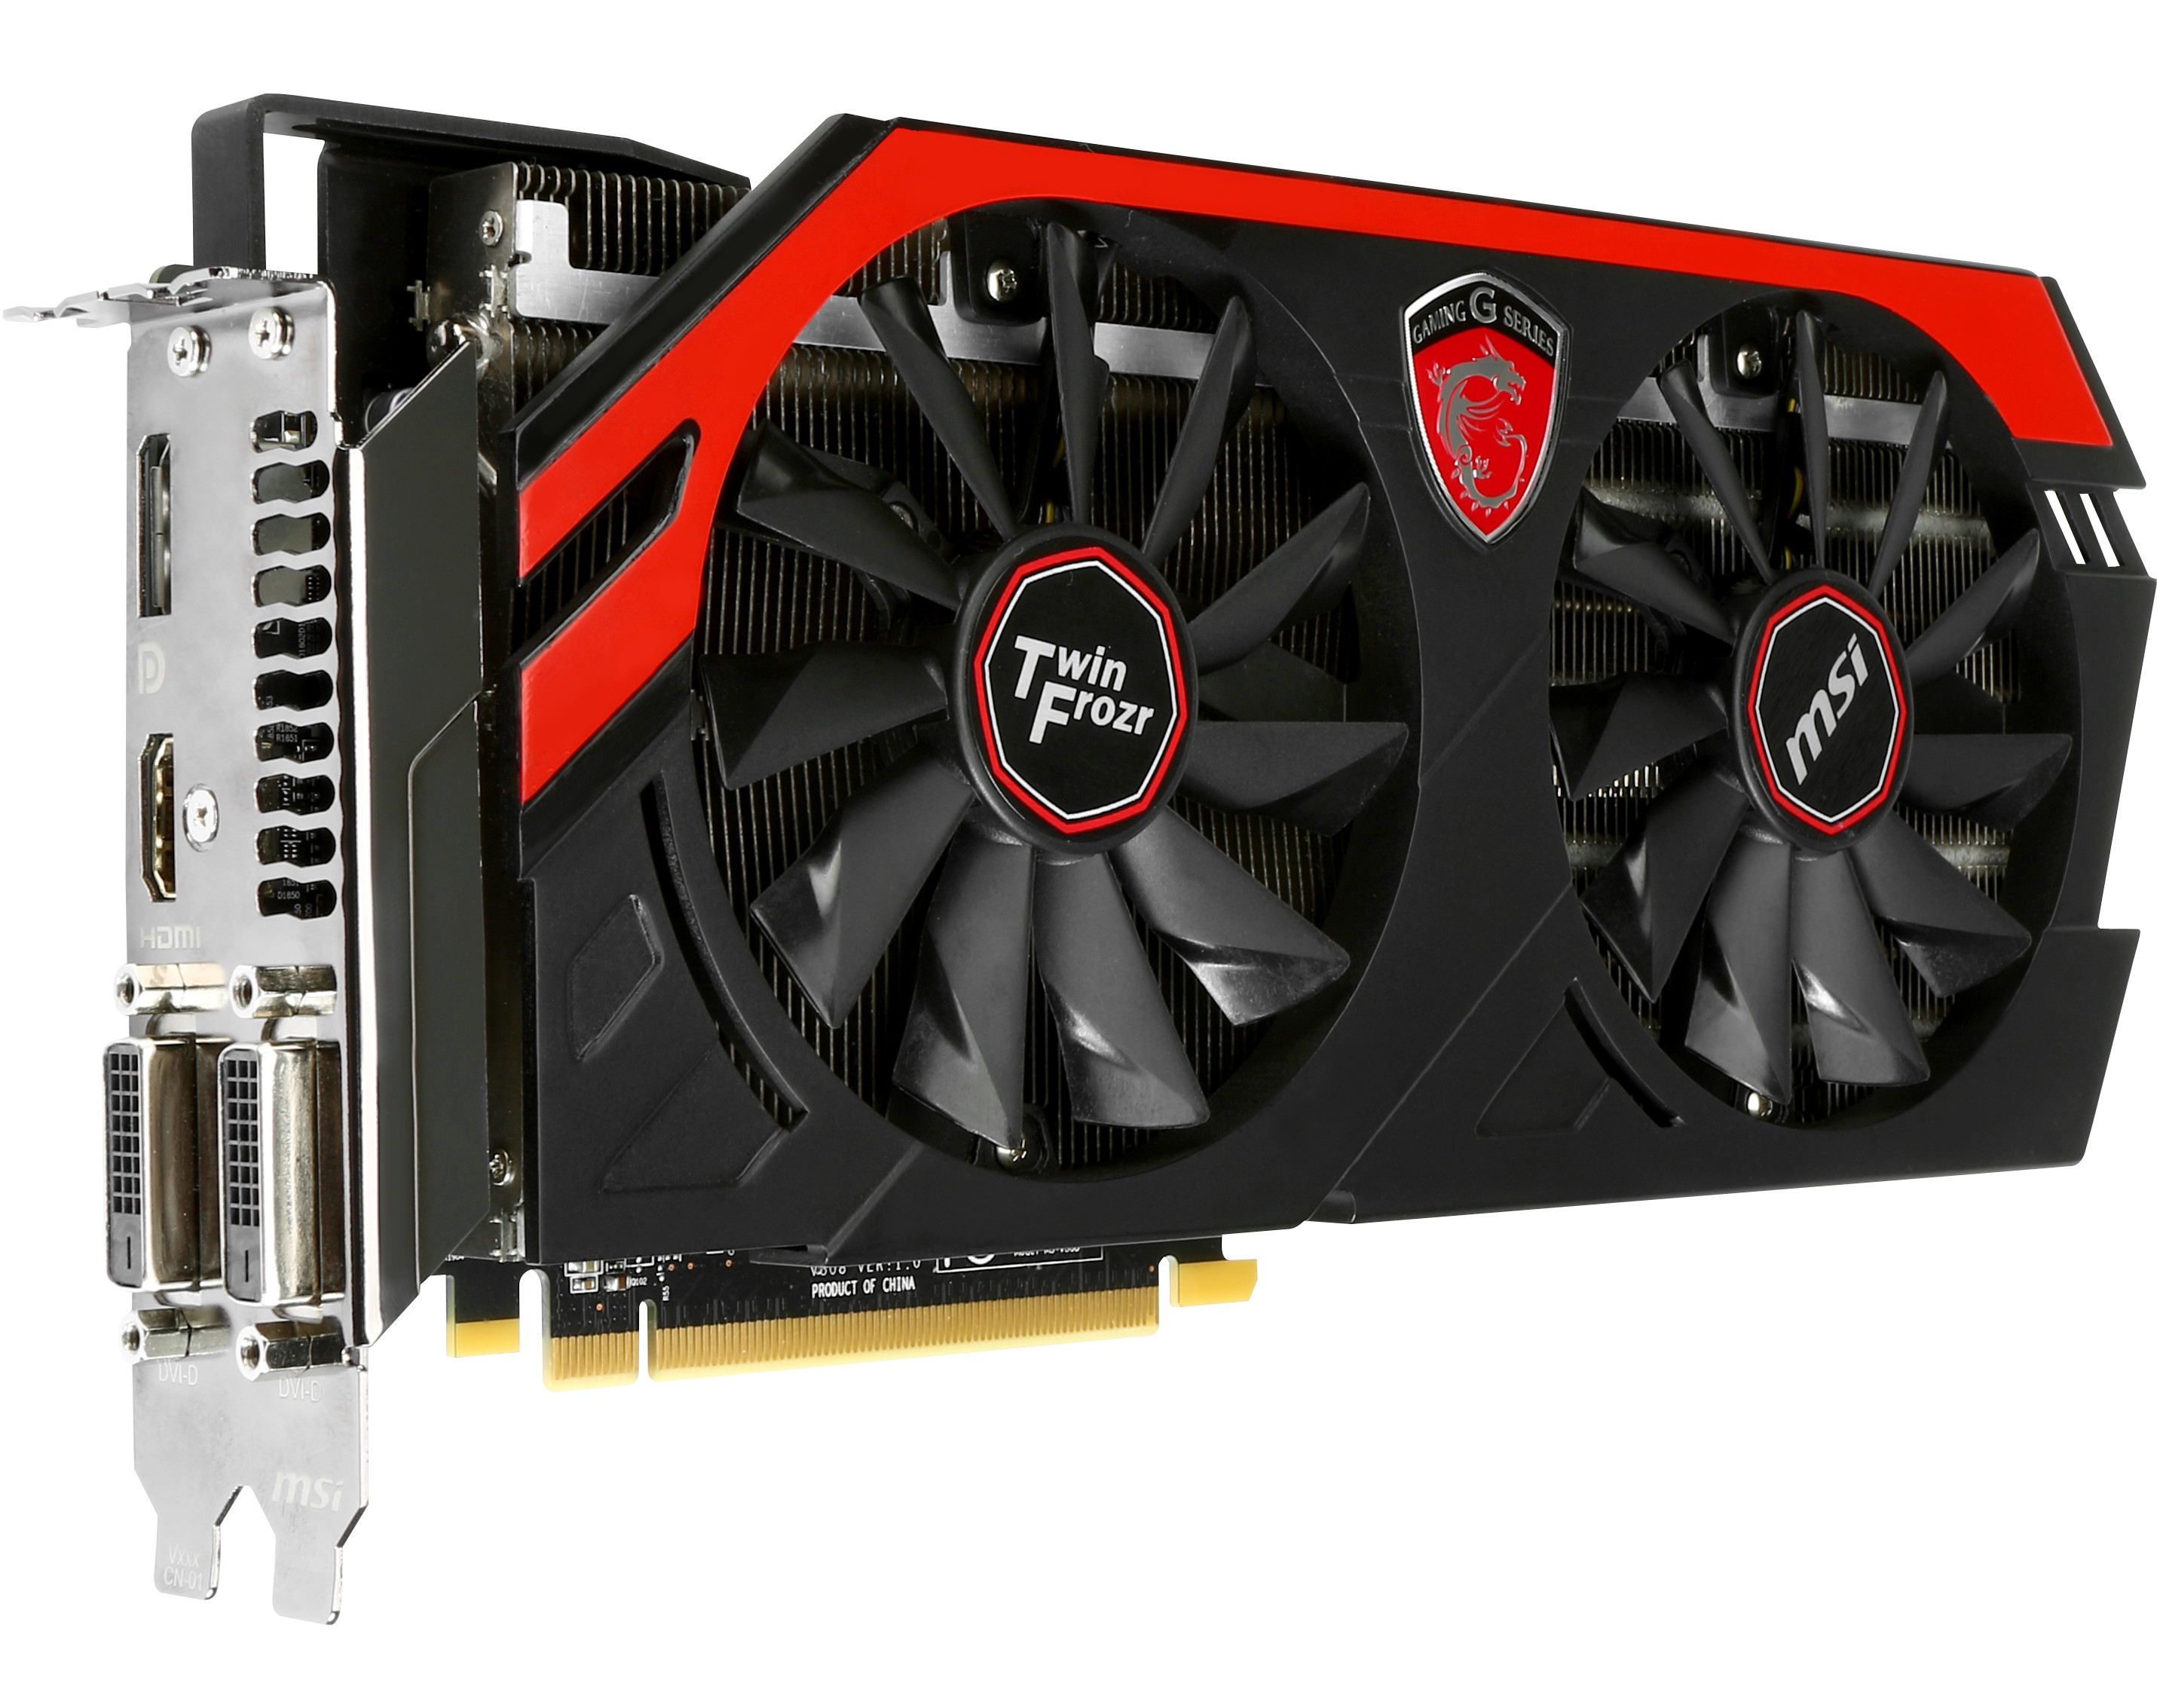 MSI R9 290X GAMING 8G graphics card now available ...